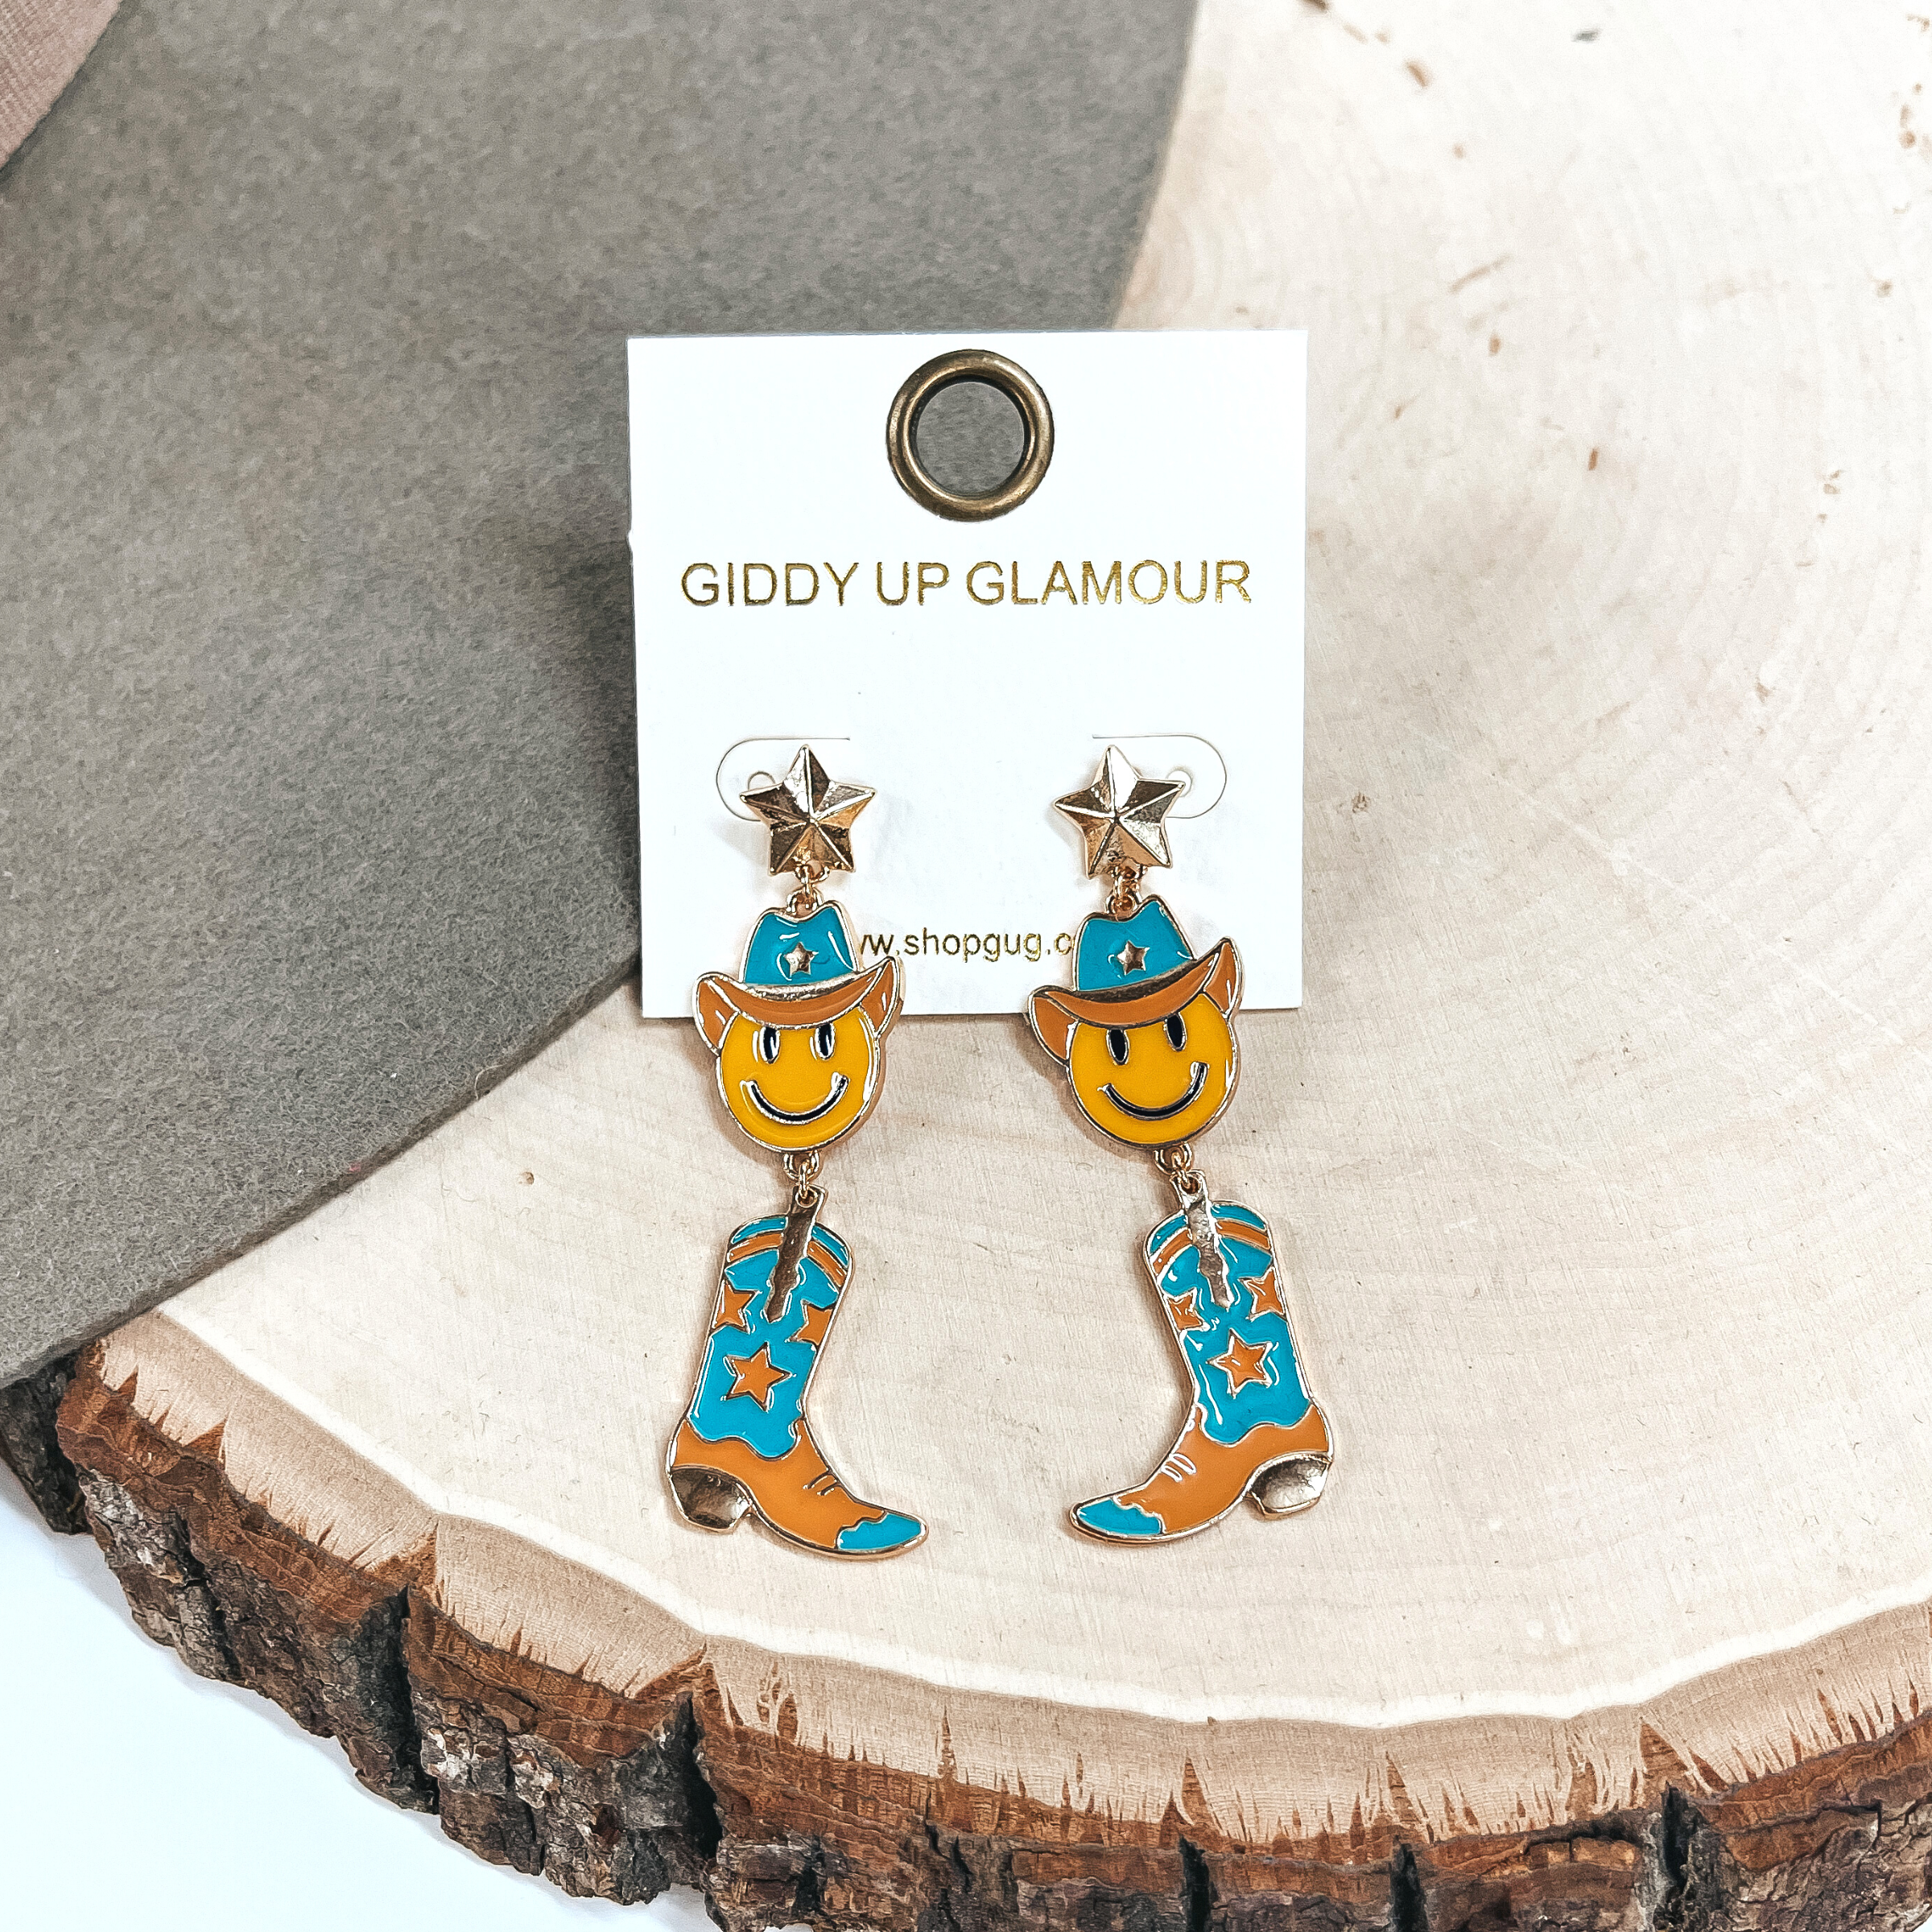 On The Fly Gold Tone Star Post Earrings with Happy Face Cowboy and Boot Pendant Earrings in Turquoise